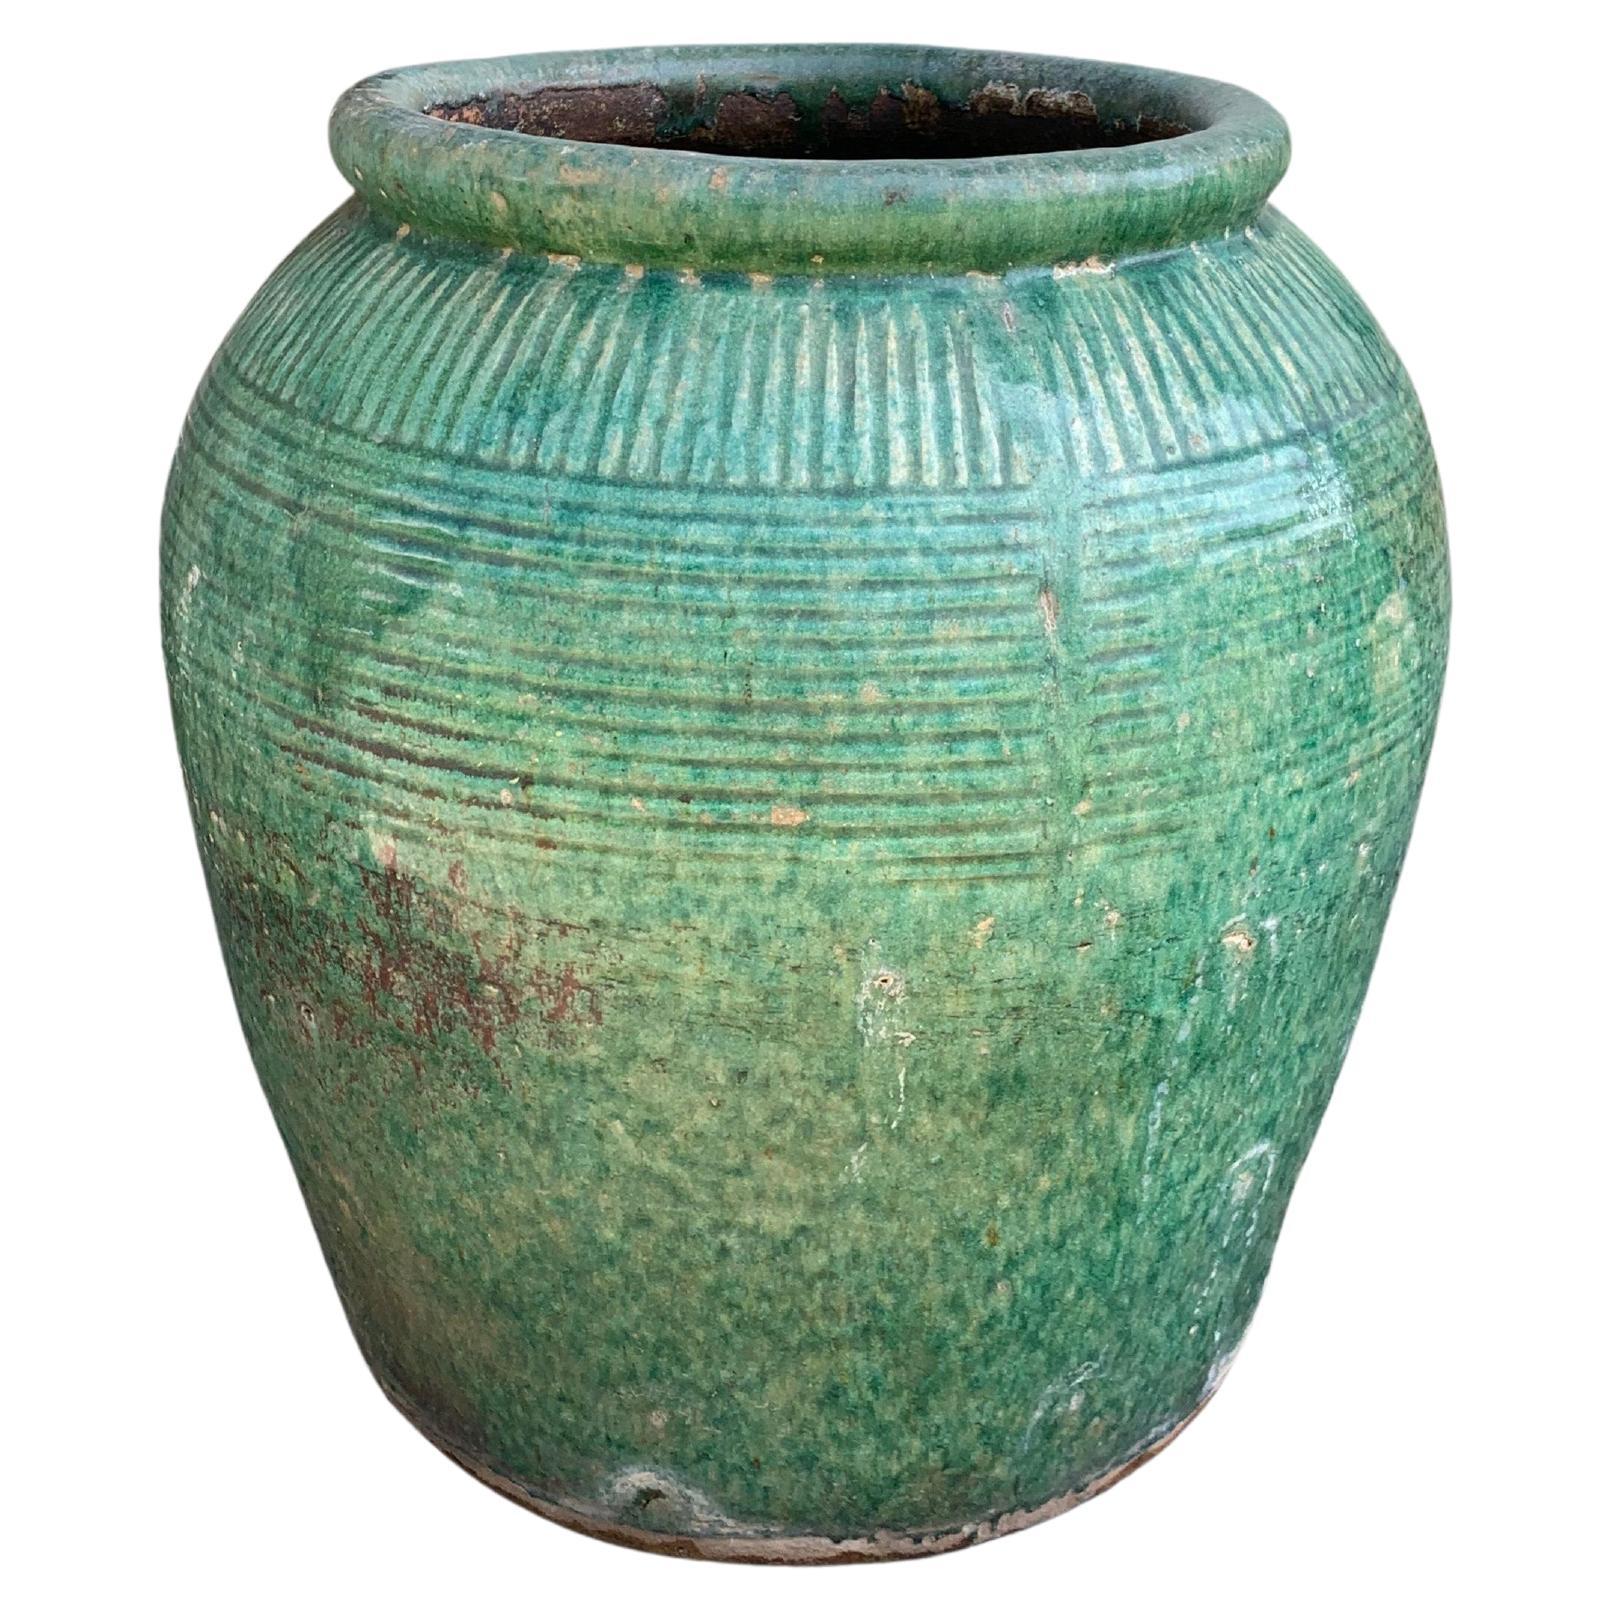 Antique Chinese Green Glazed Ceramic Soy Sauce Jar, c. 1900 For Sale